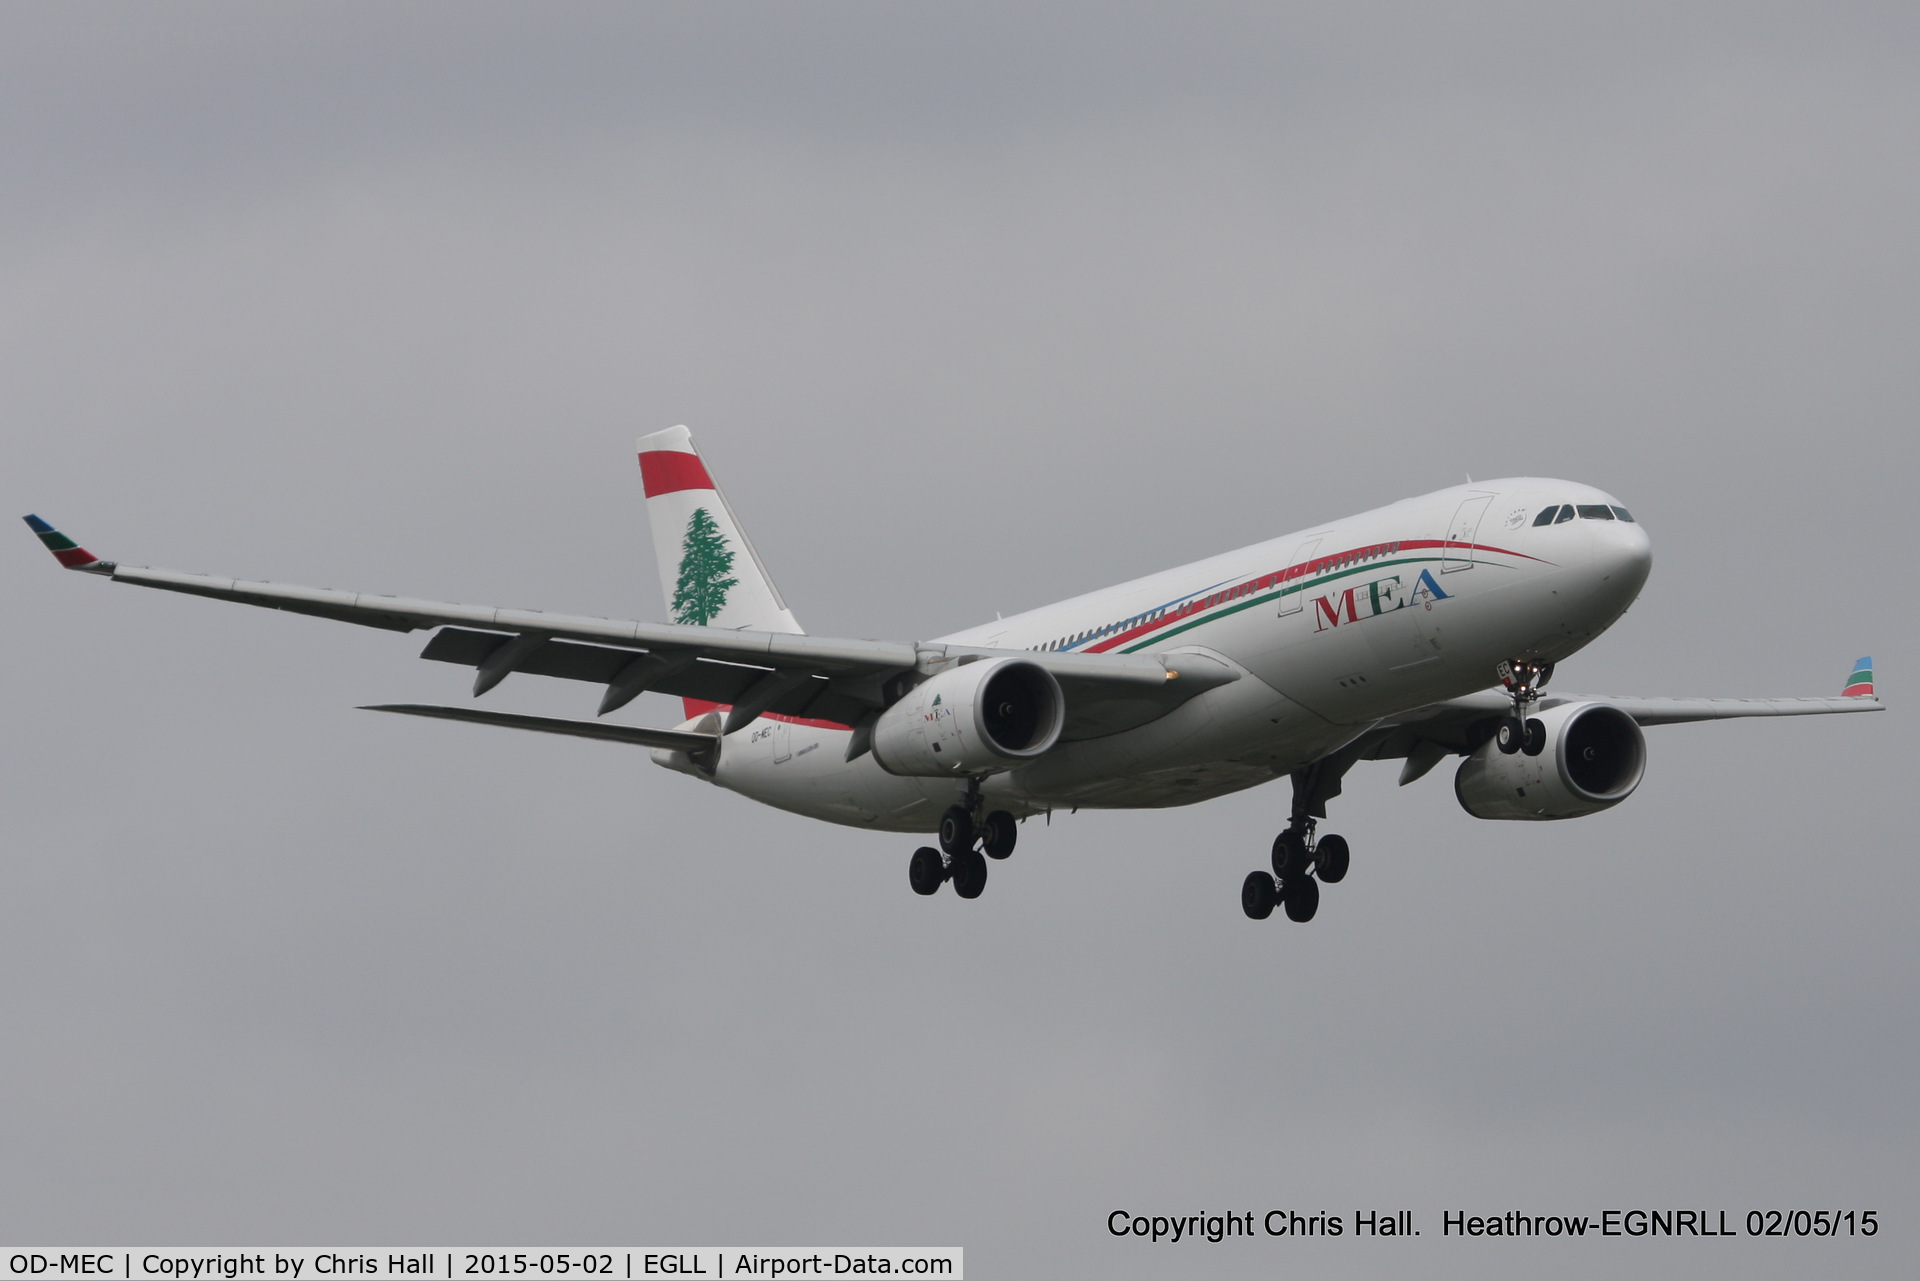 OD-MEC, 2009 Airbus A330-243 C/N 995, MEA - Middle East Airlines